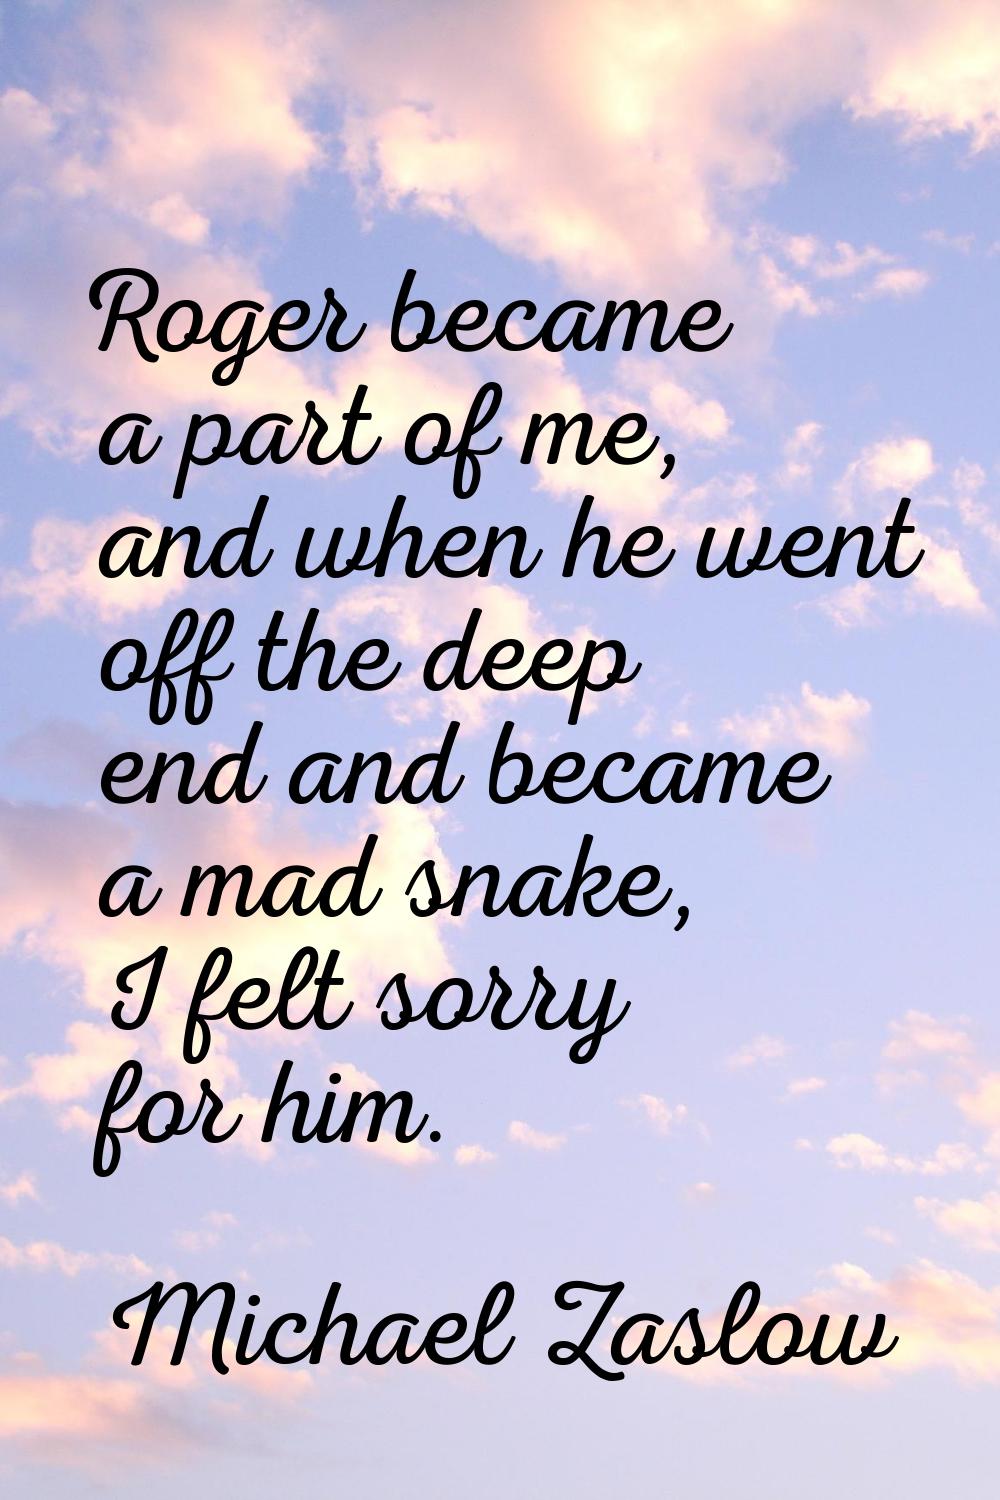 Roger became a part of me, and when he went off the deep end and became a mad snake, I felt sorry f